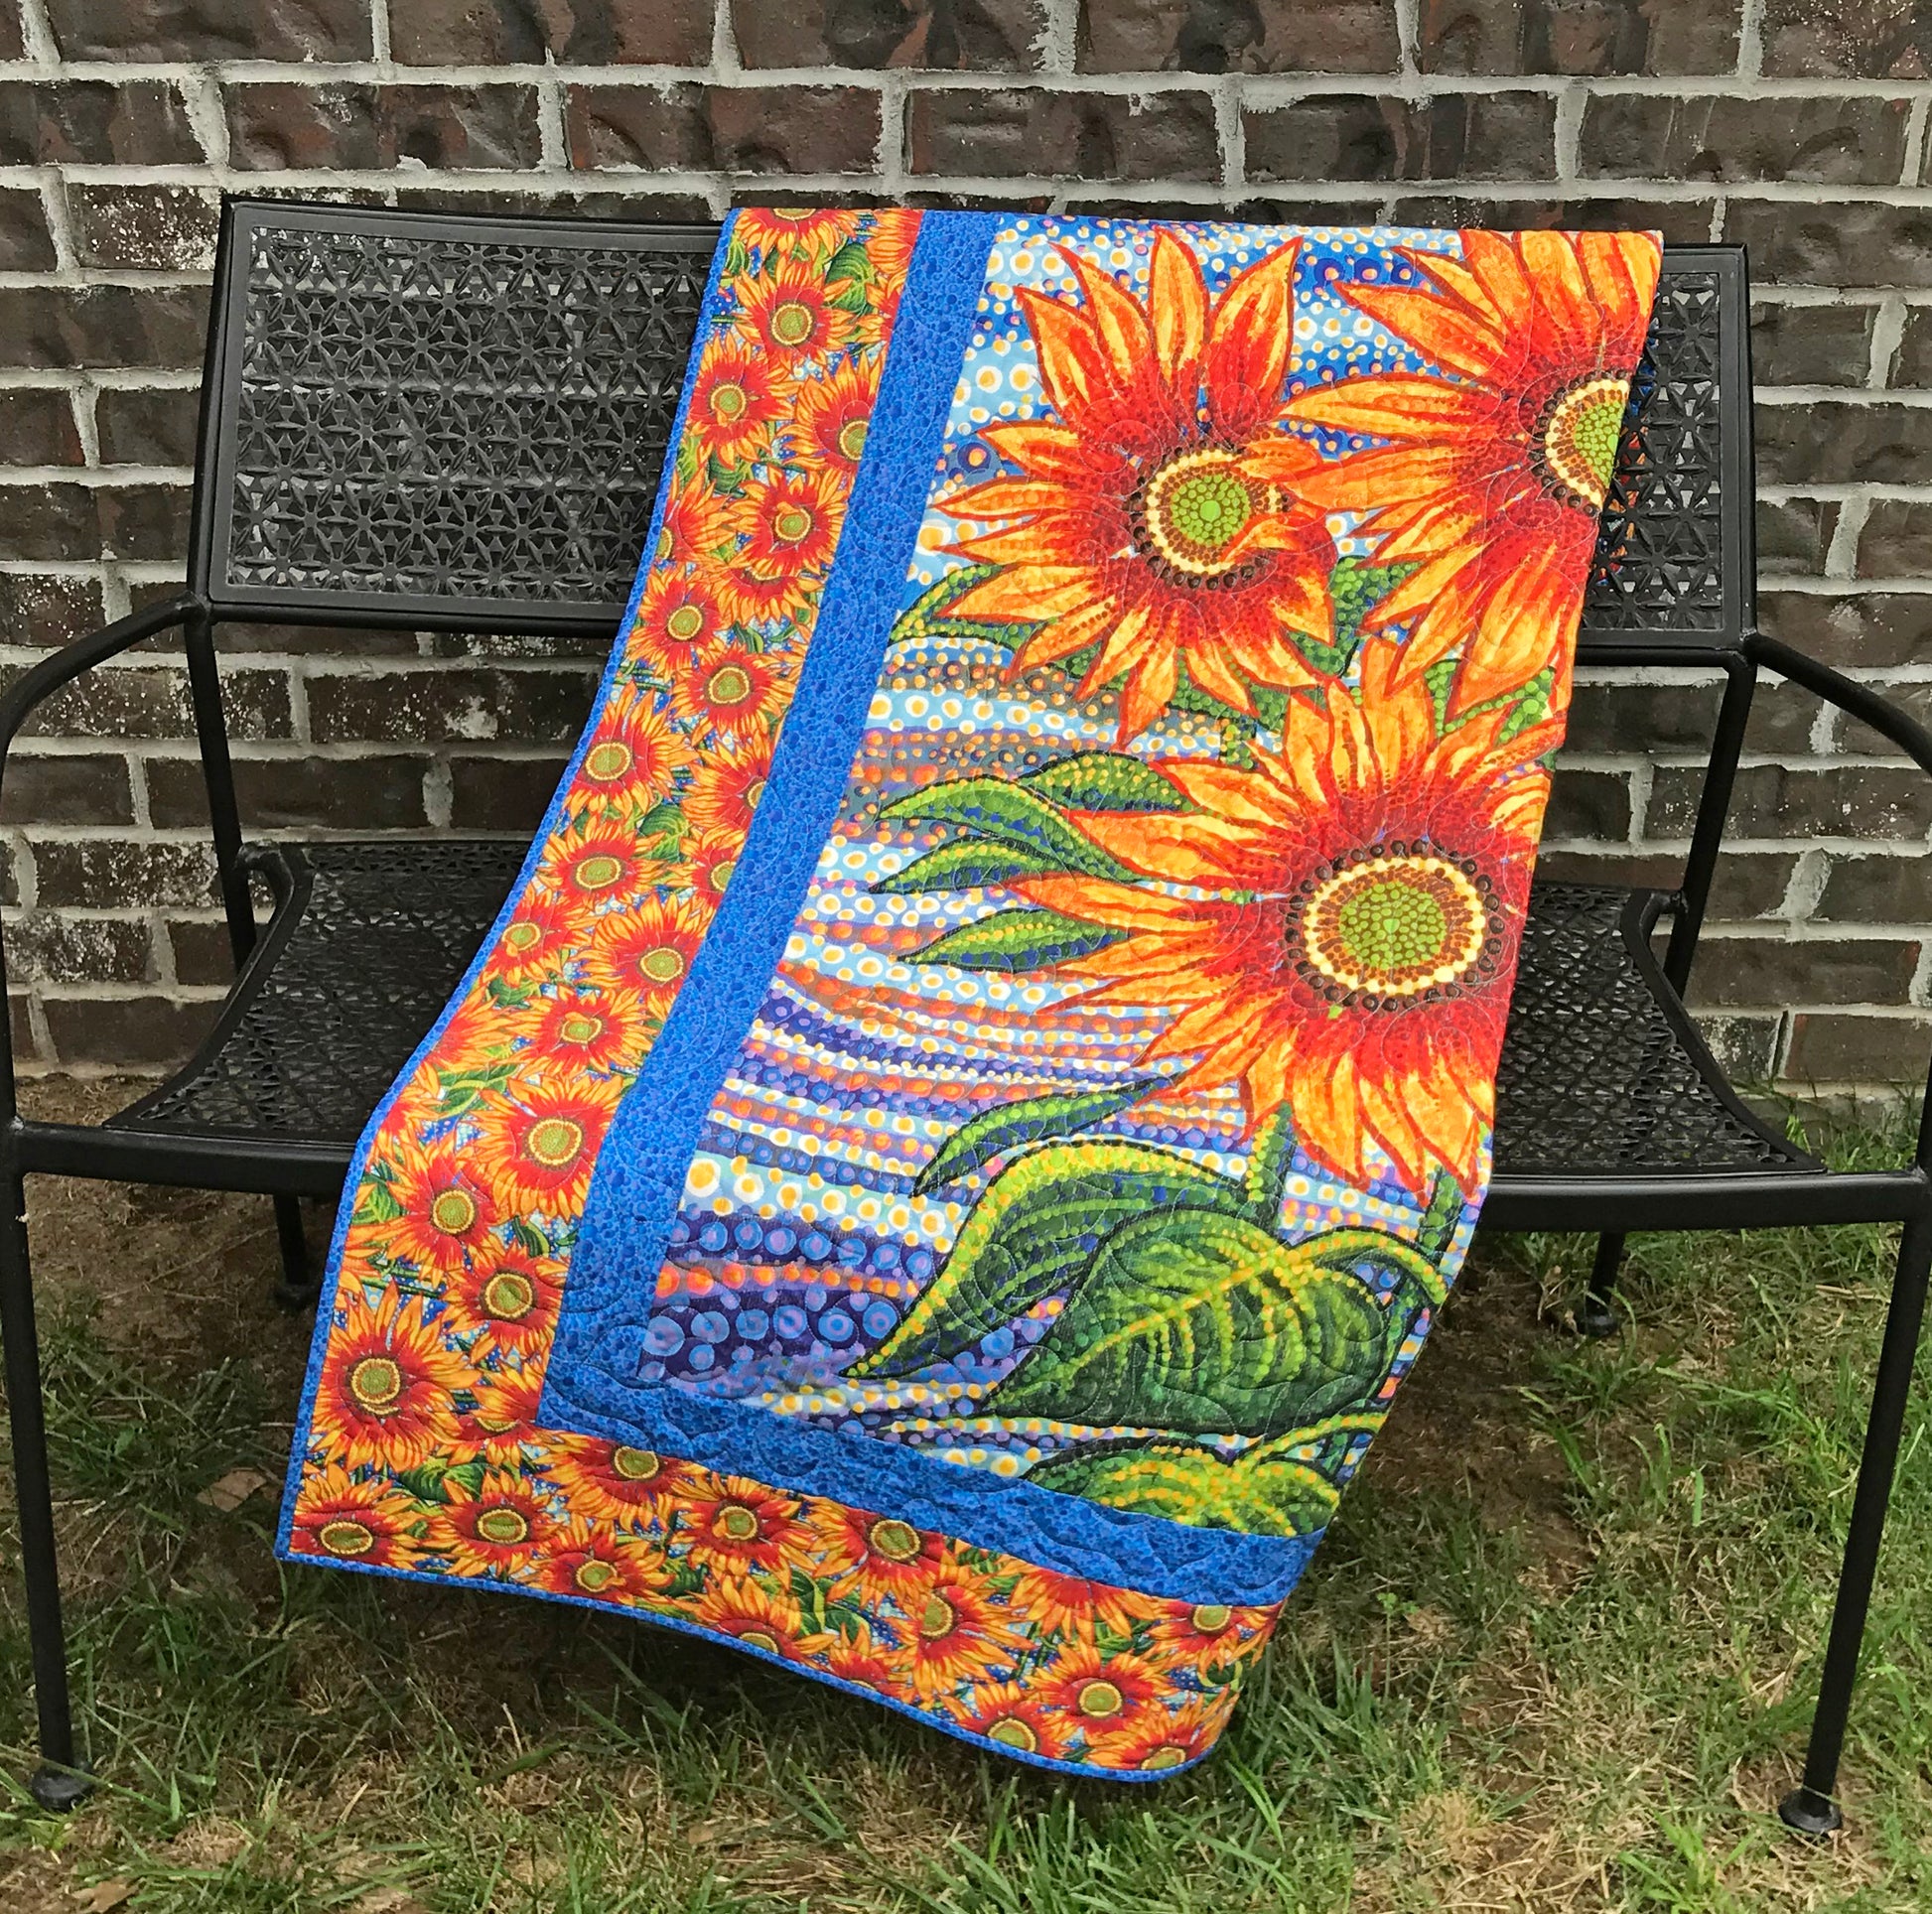 Blue and Gold Sunflower Themed Panel Quilt - Handmade Quilts, Digital Patterns, and Home Décor items online - Cuddle Cat Quiltworks